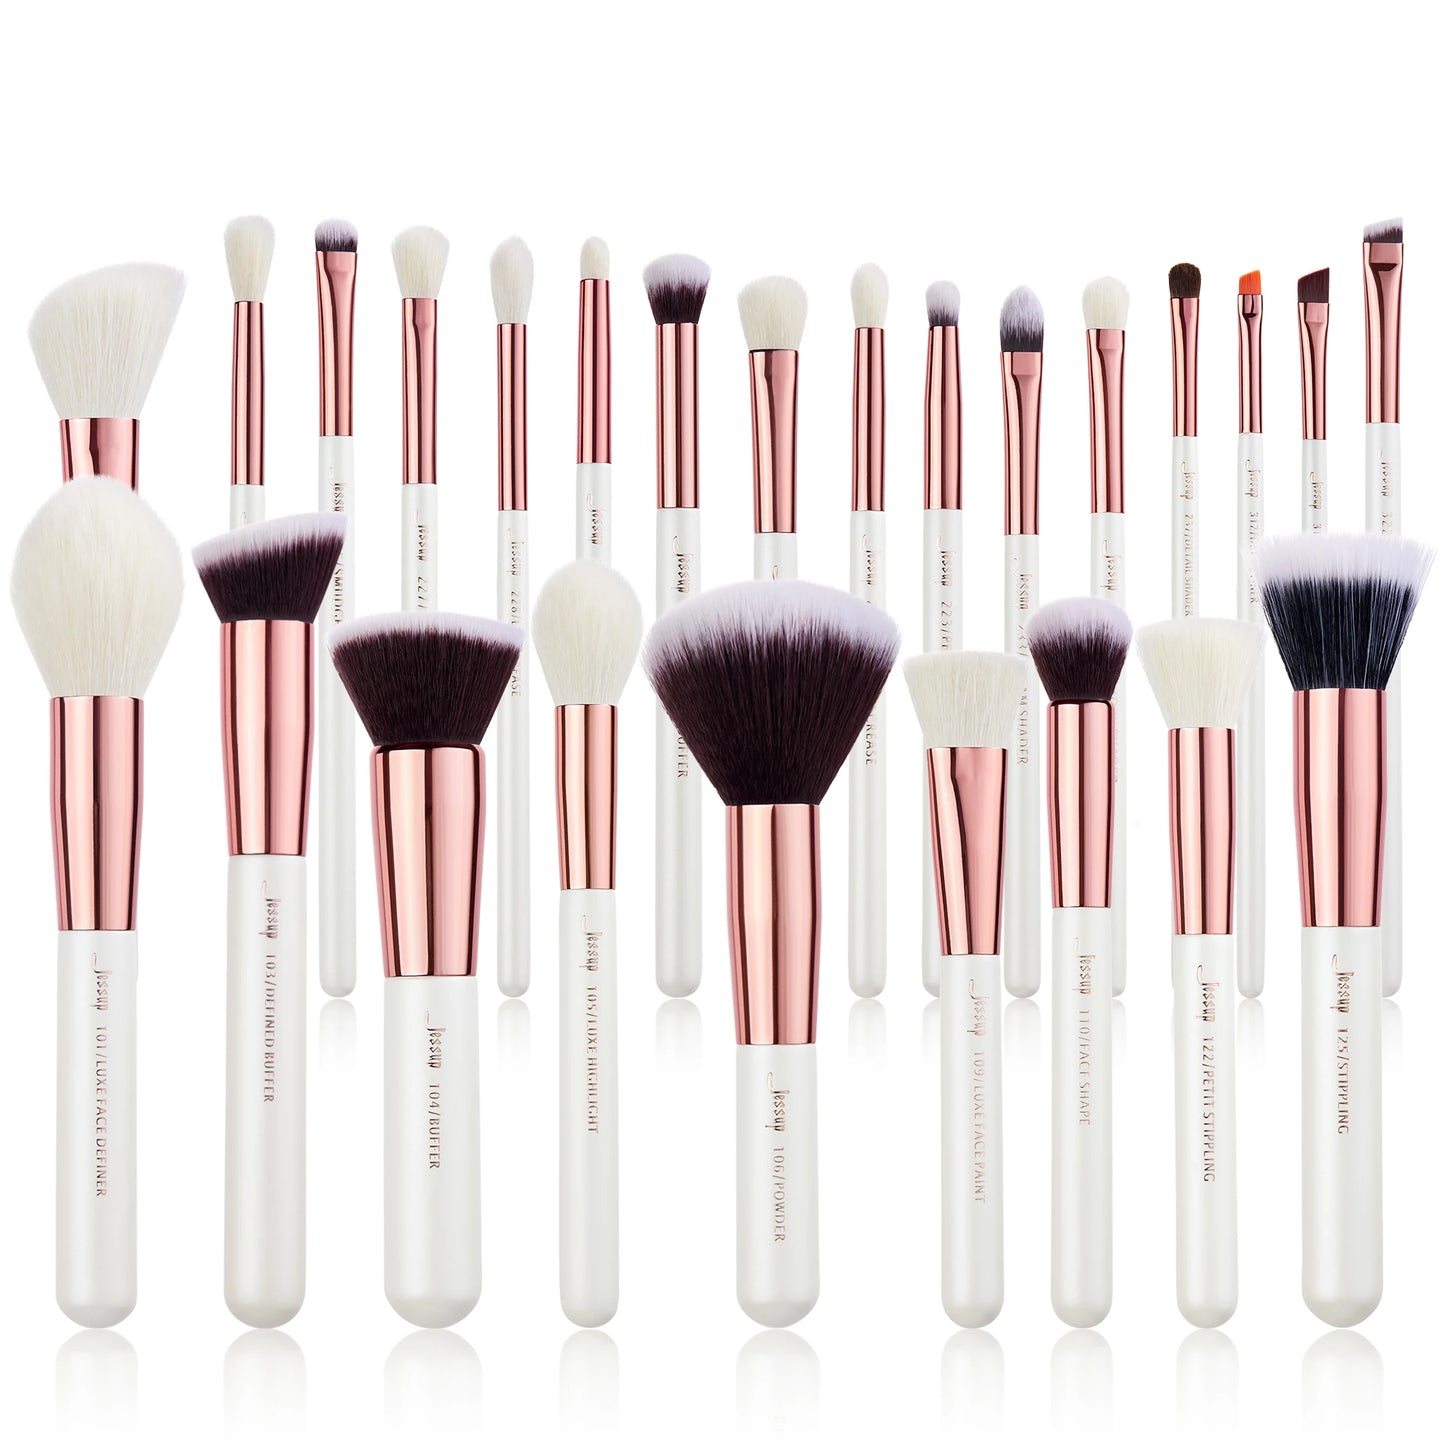 Professional Makeup Brushes | Makeup Brushes Set | Pinkypiebeauty